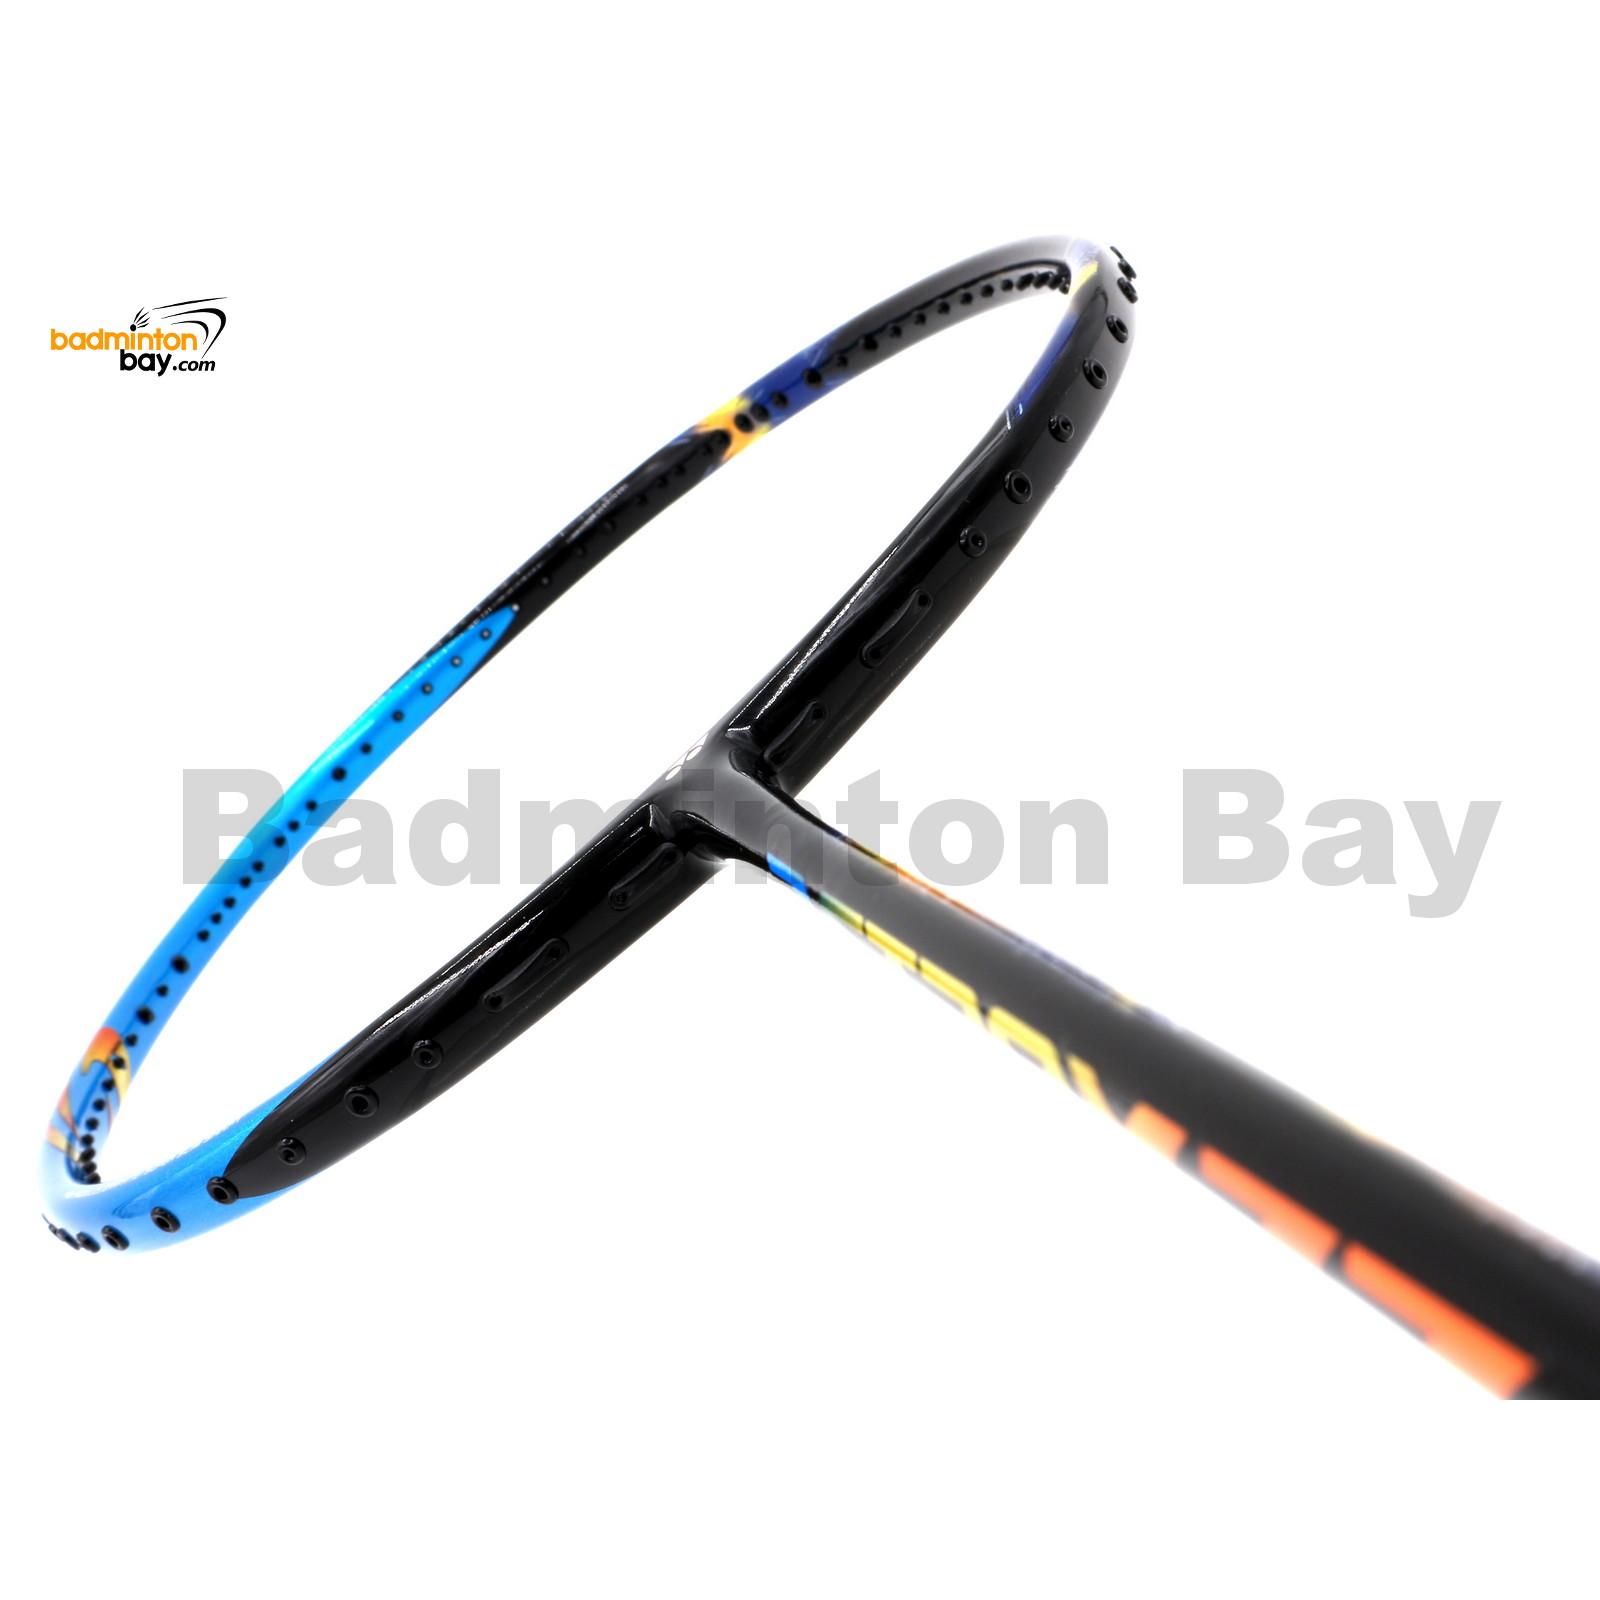 ATTACK AND DEFEND! YONEX DUORA 6 BADMINTON RACKET 4UG5 MADE IN JAPAN 